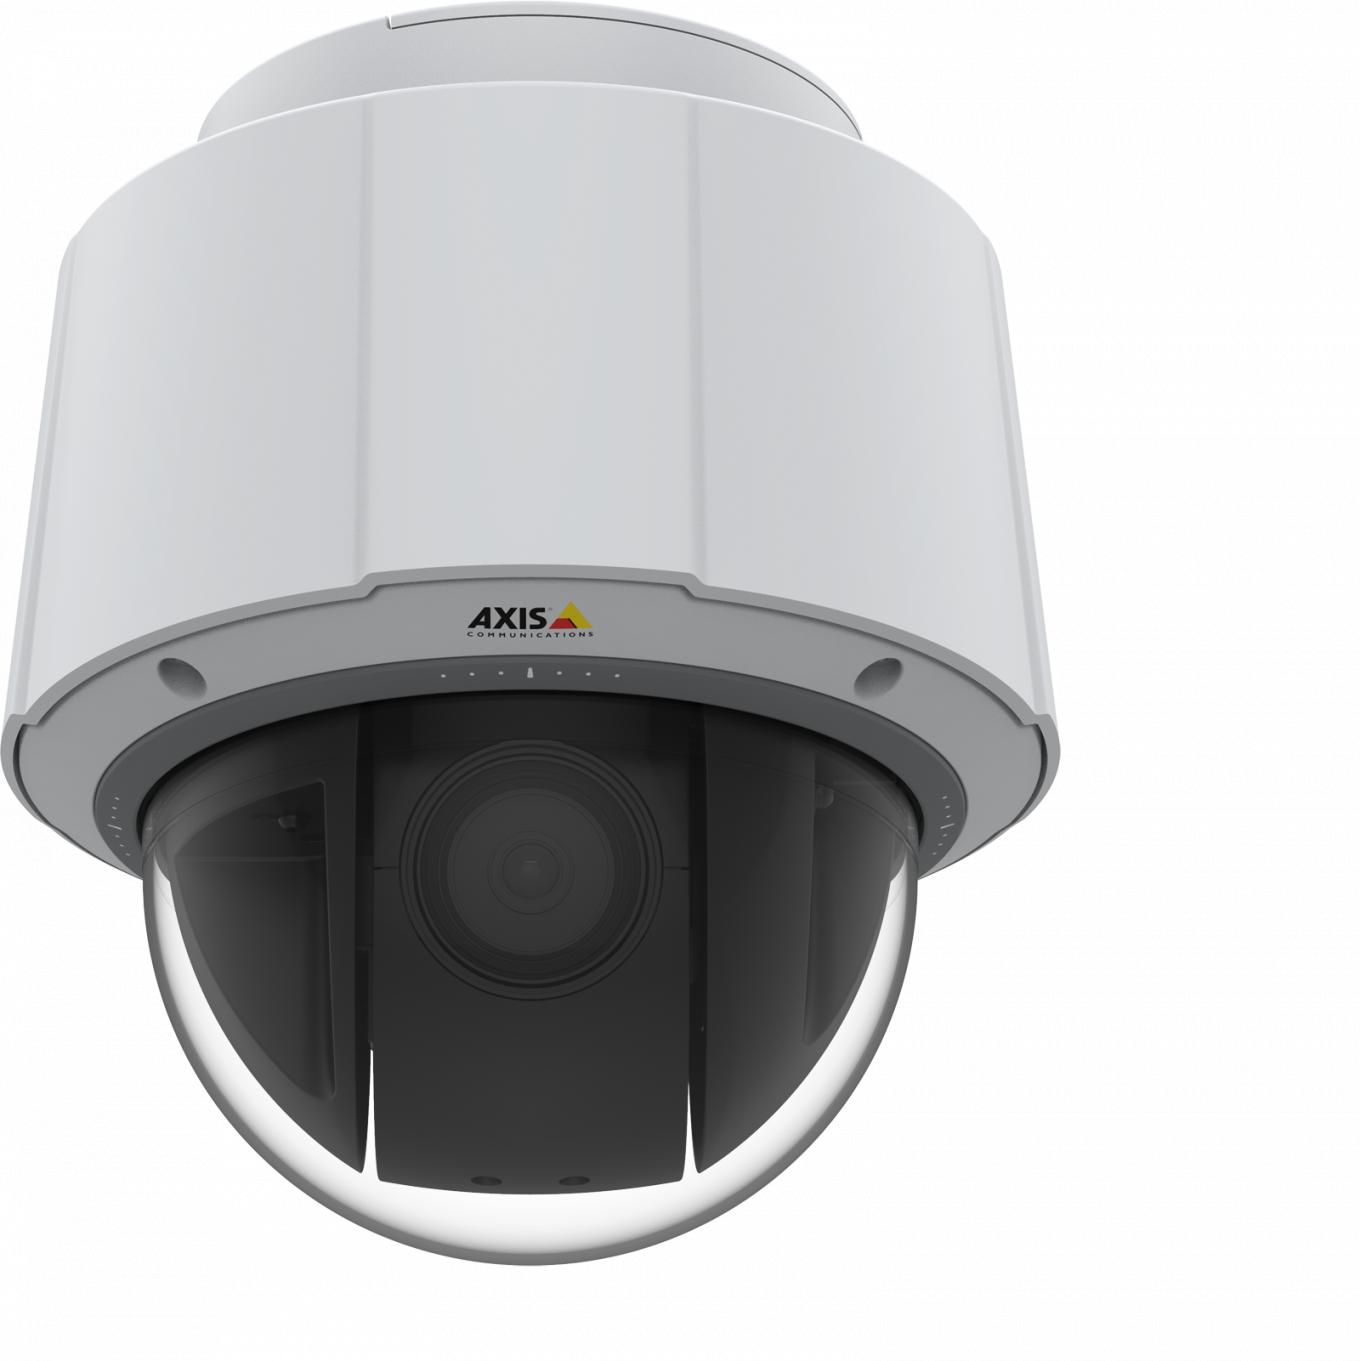 Axis IP Camera Q6074 has Indoor PTZ with HDTV 720p and 30x optical zoom